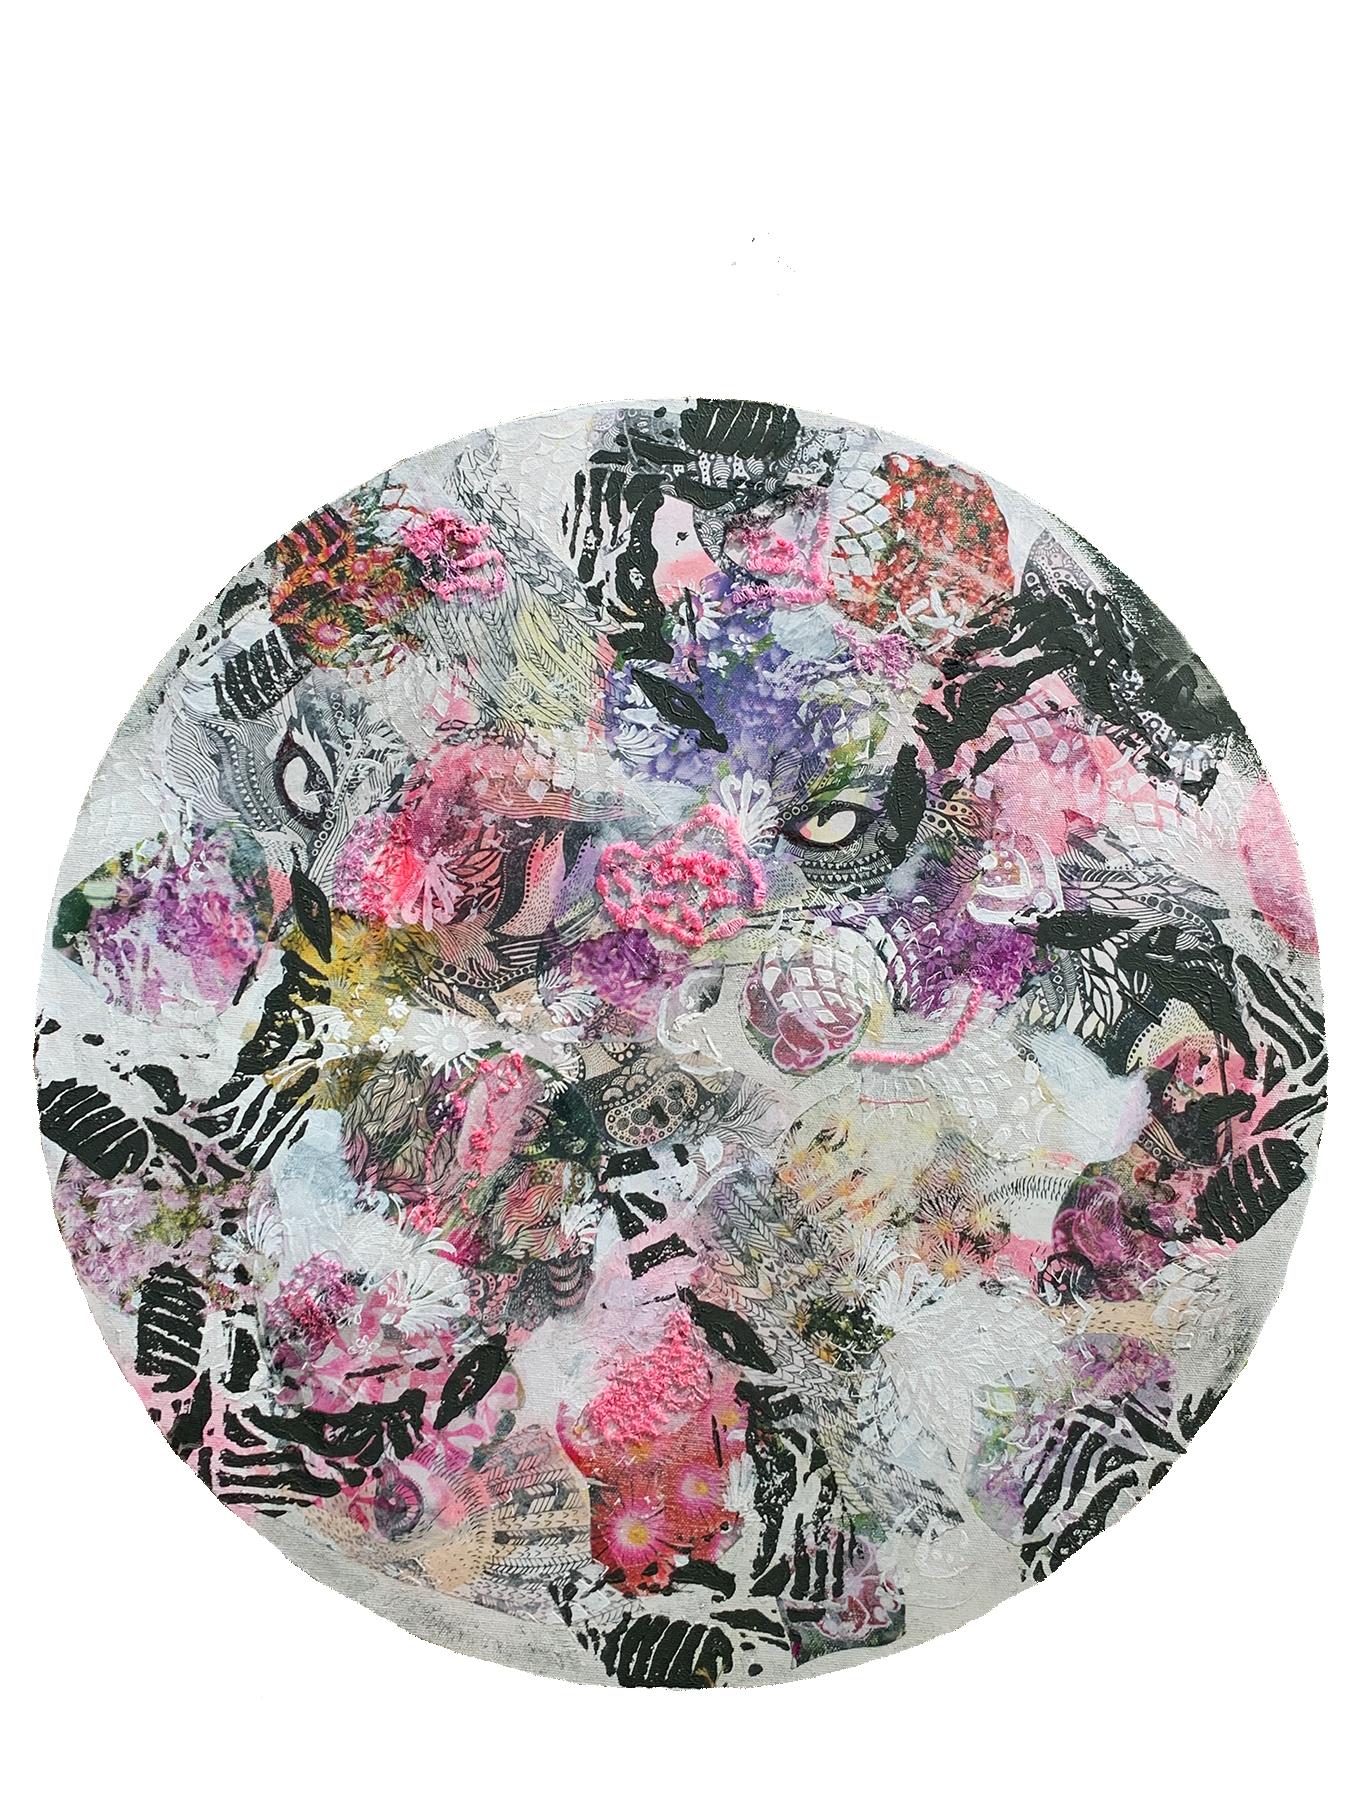 Tokolosh- Round Mixed Media Abstract Painting in Pink and White Circle Mythology